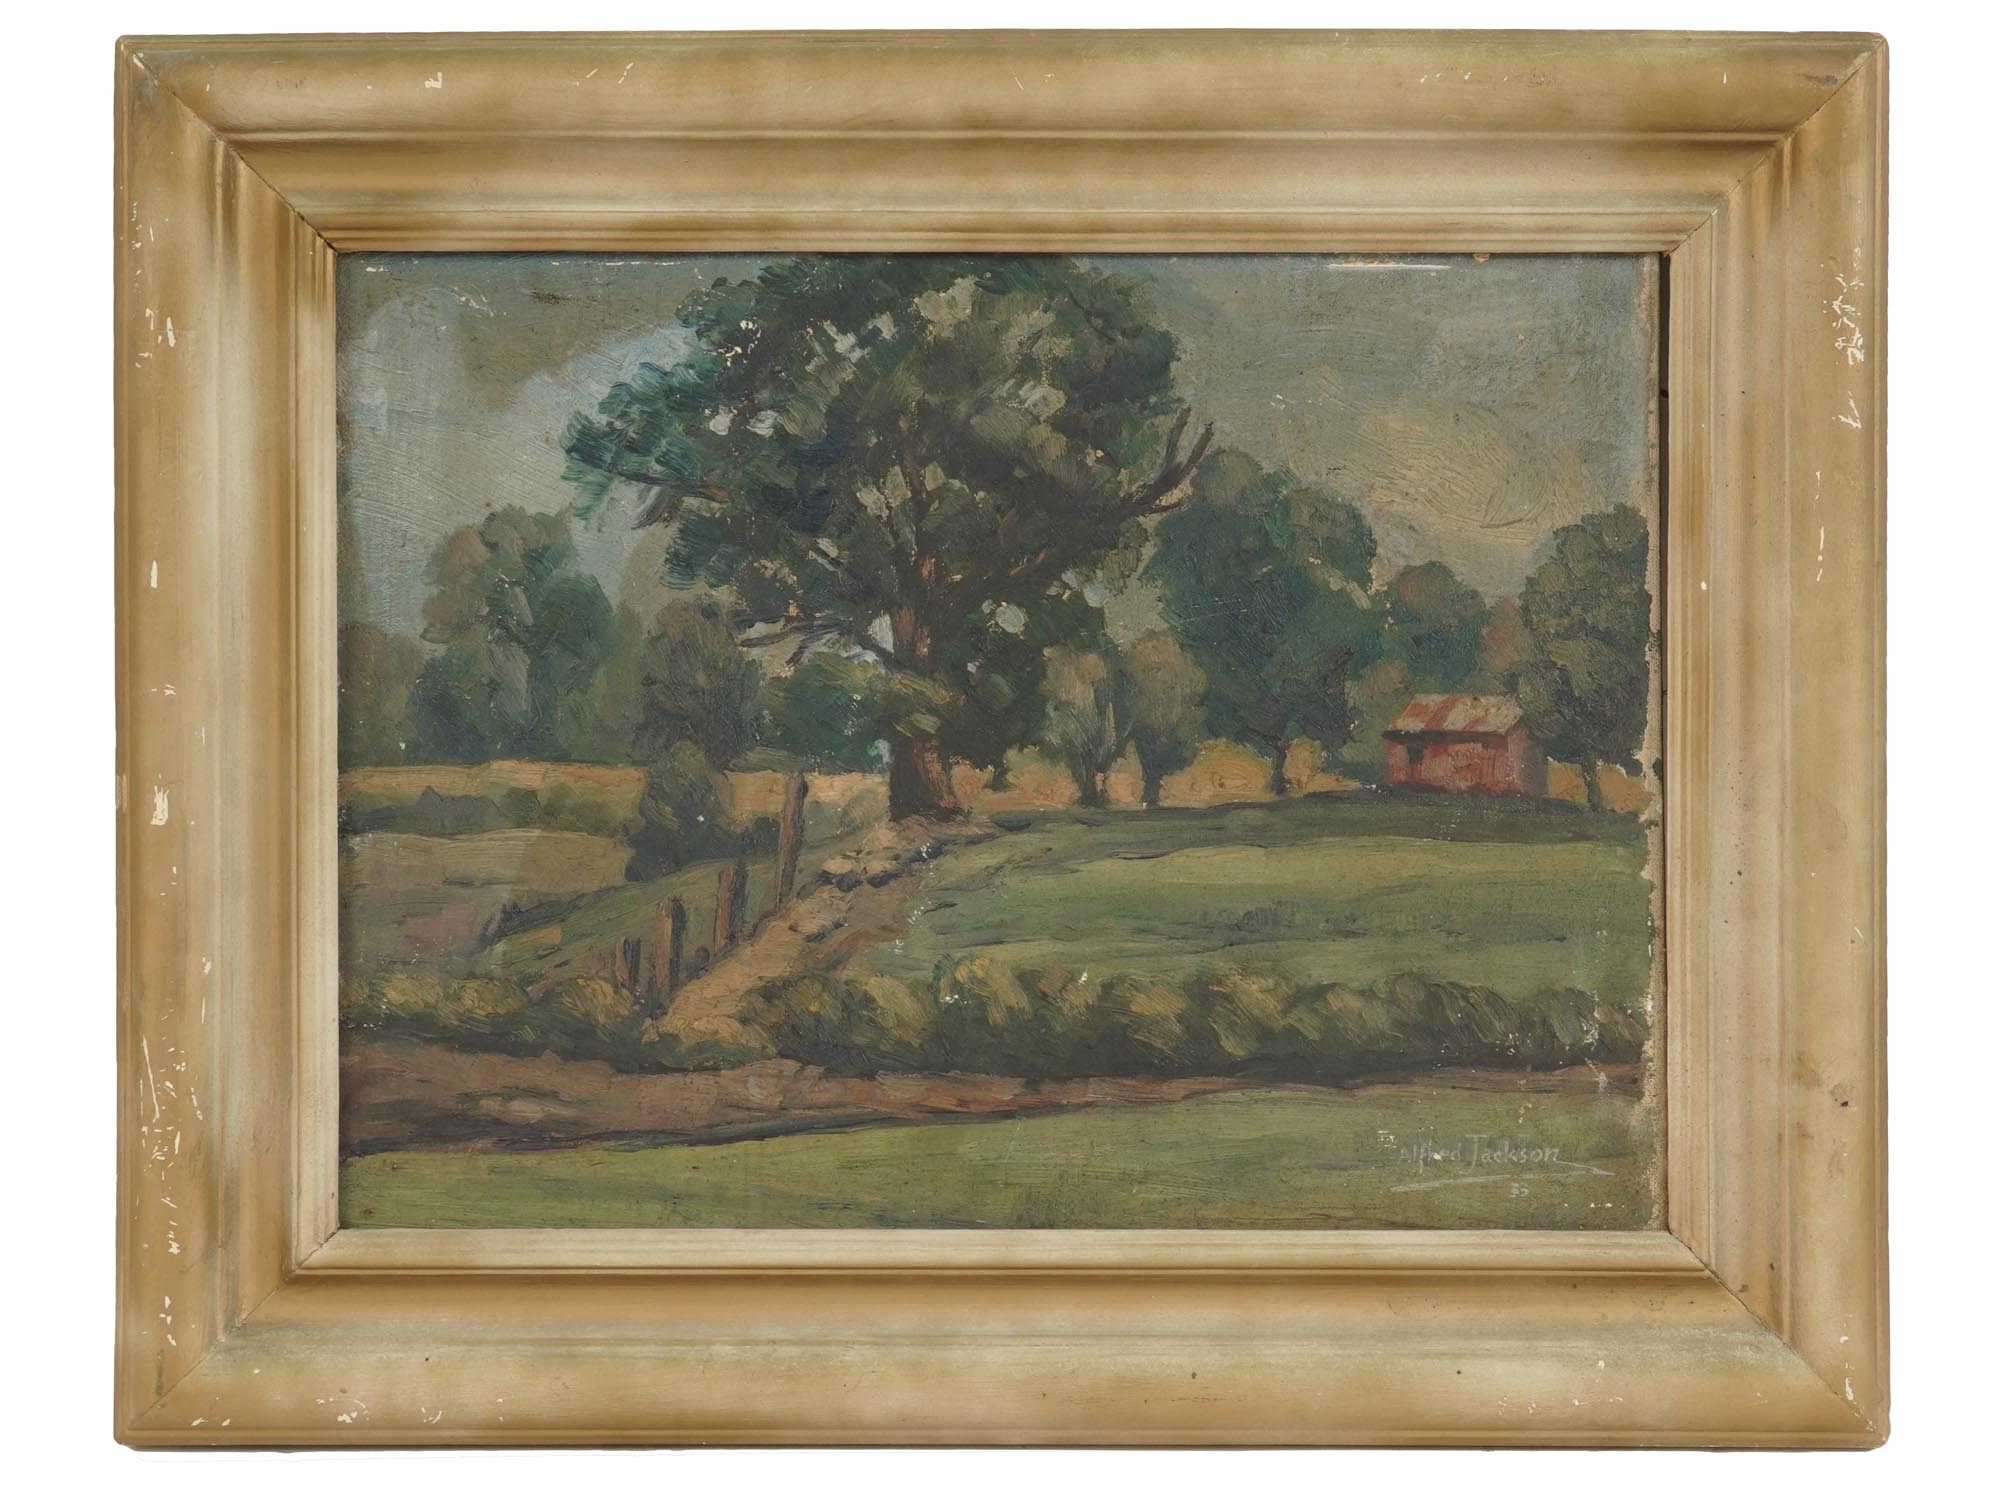 AMERICAN LANDSCAPE PAINTING BY ALFRED JACKSON PIC-0